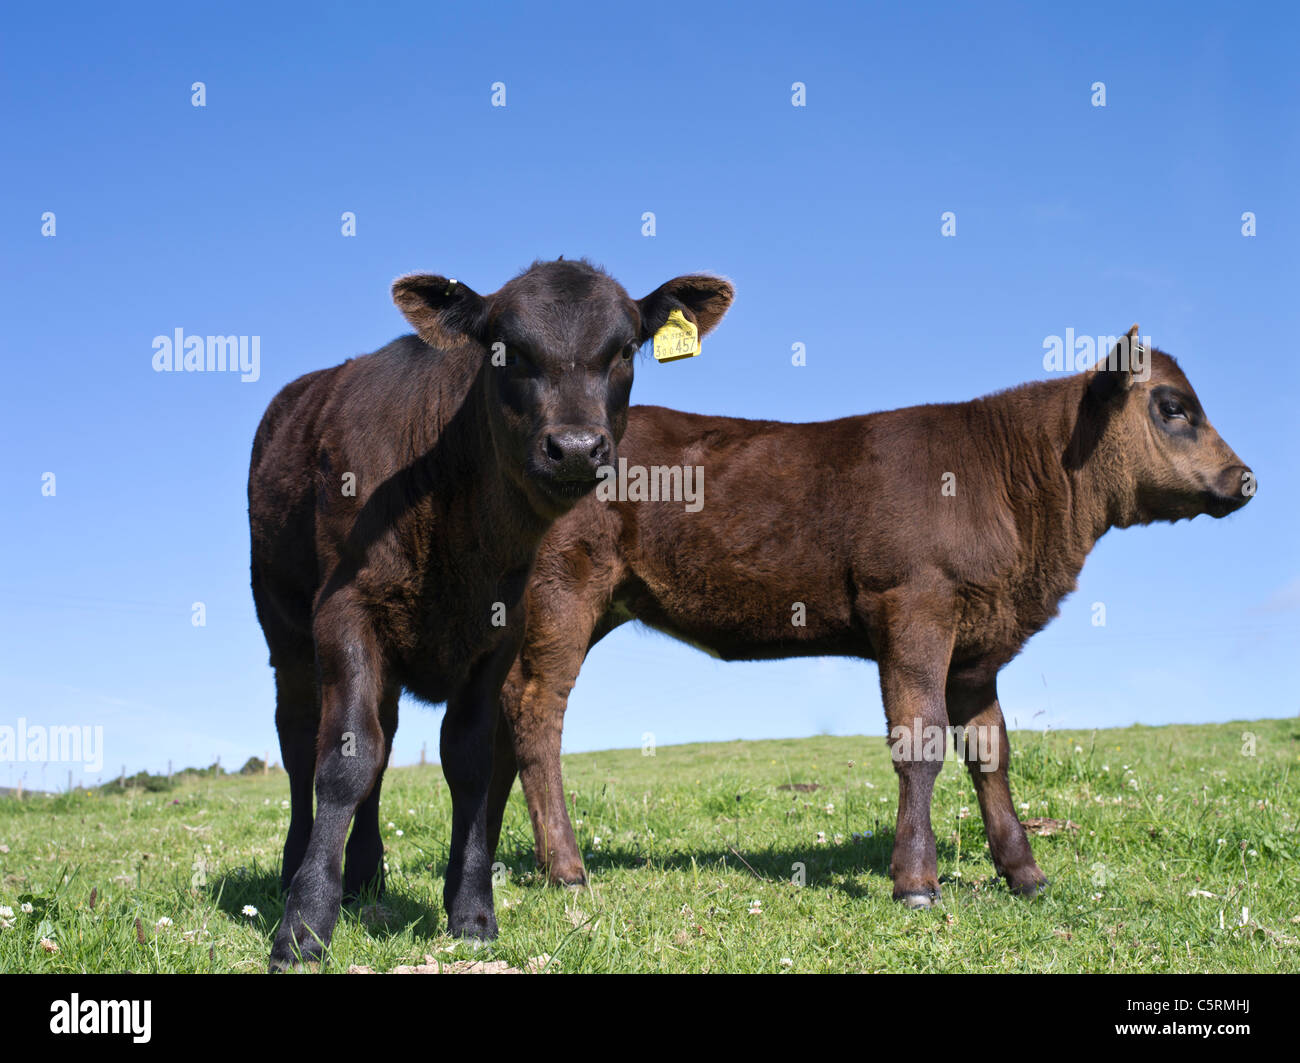 dh Aberdeen Angus calves CATTLE UK Calf Cows head on and profile black uk cow gb young cute scotland livestock Stock Photo